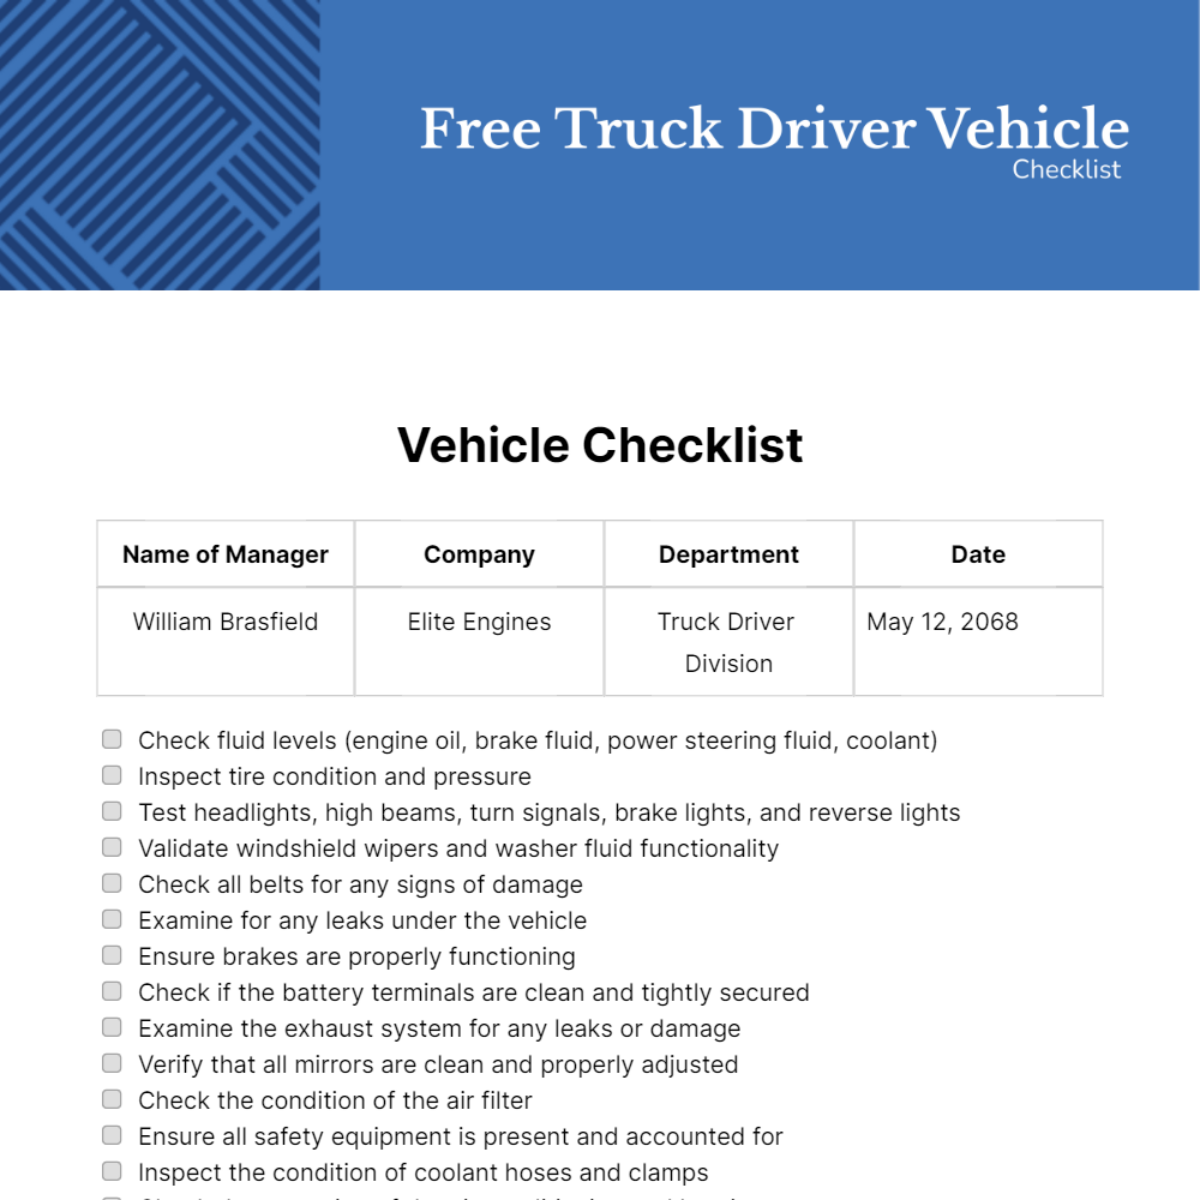 Free Truck Driver Vehicle Checklist Template